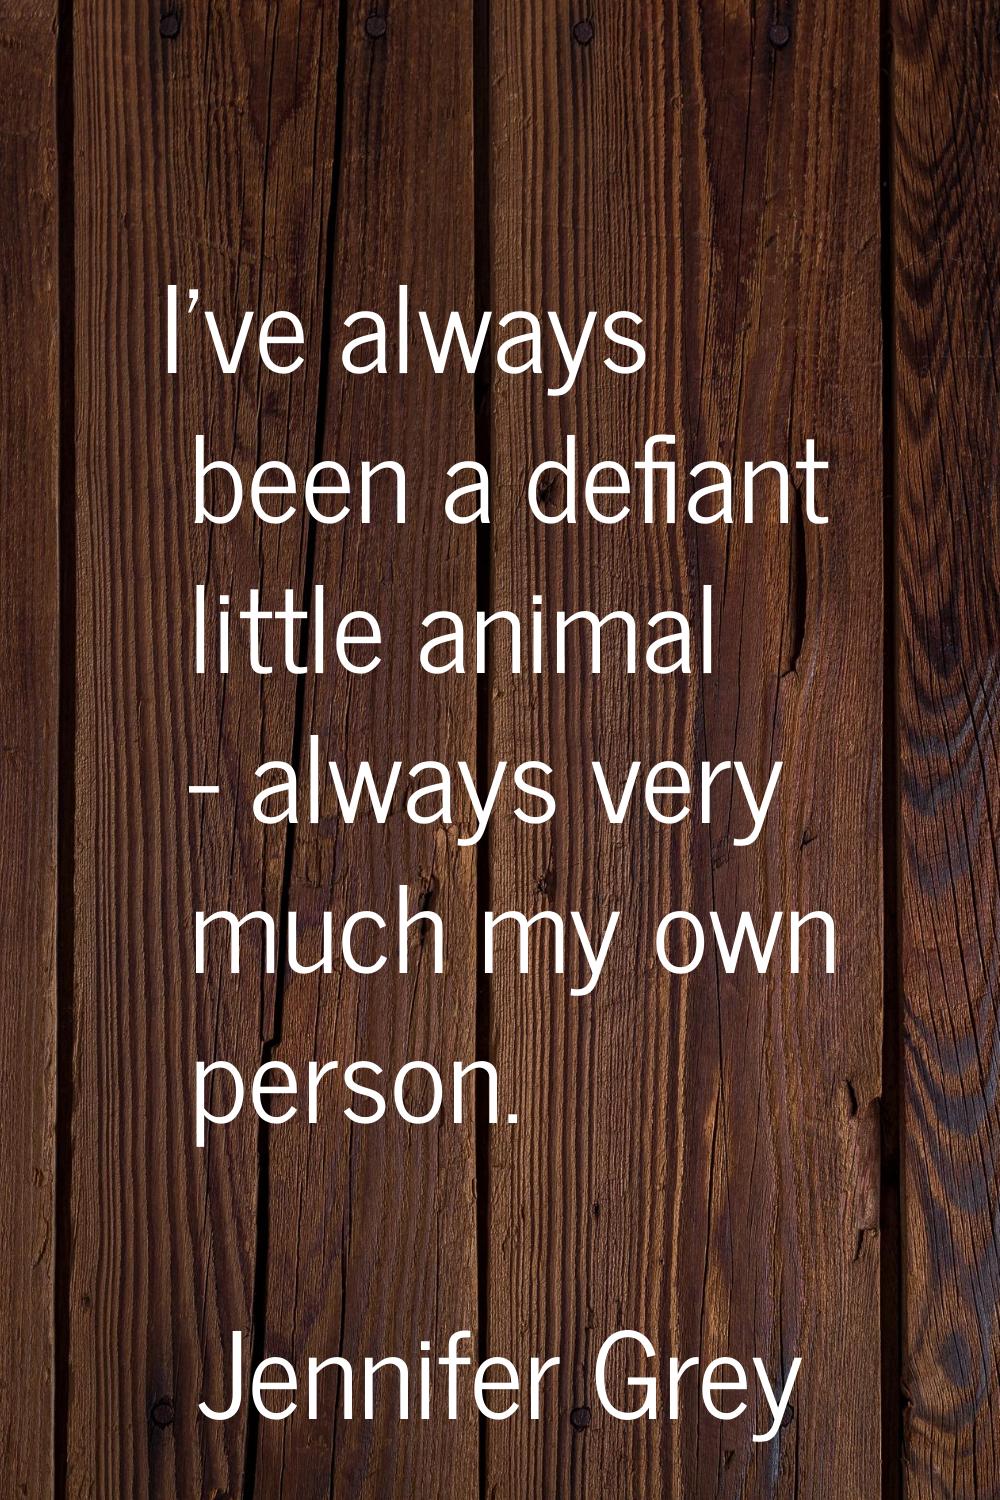 I've always been a defiant little animal - always very much my own person.